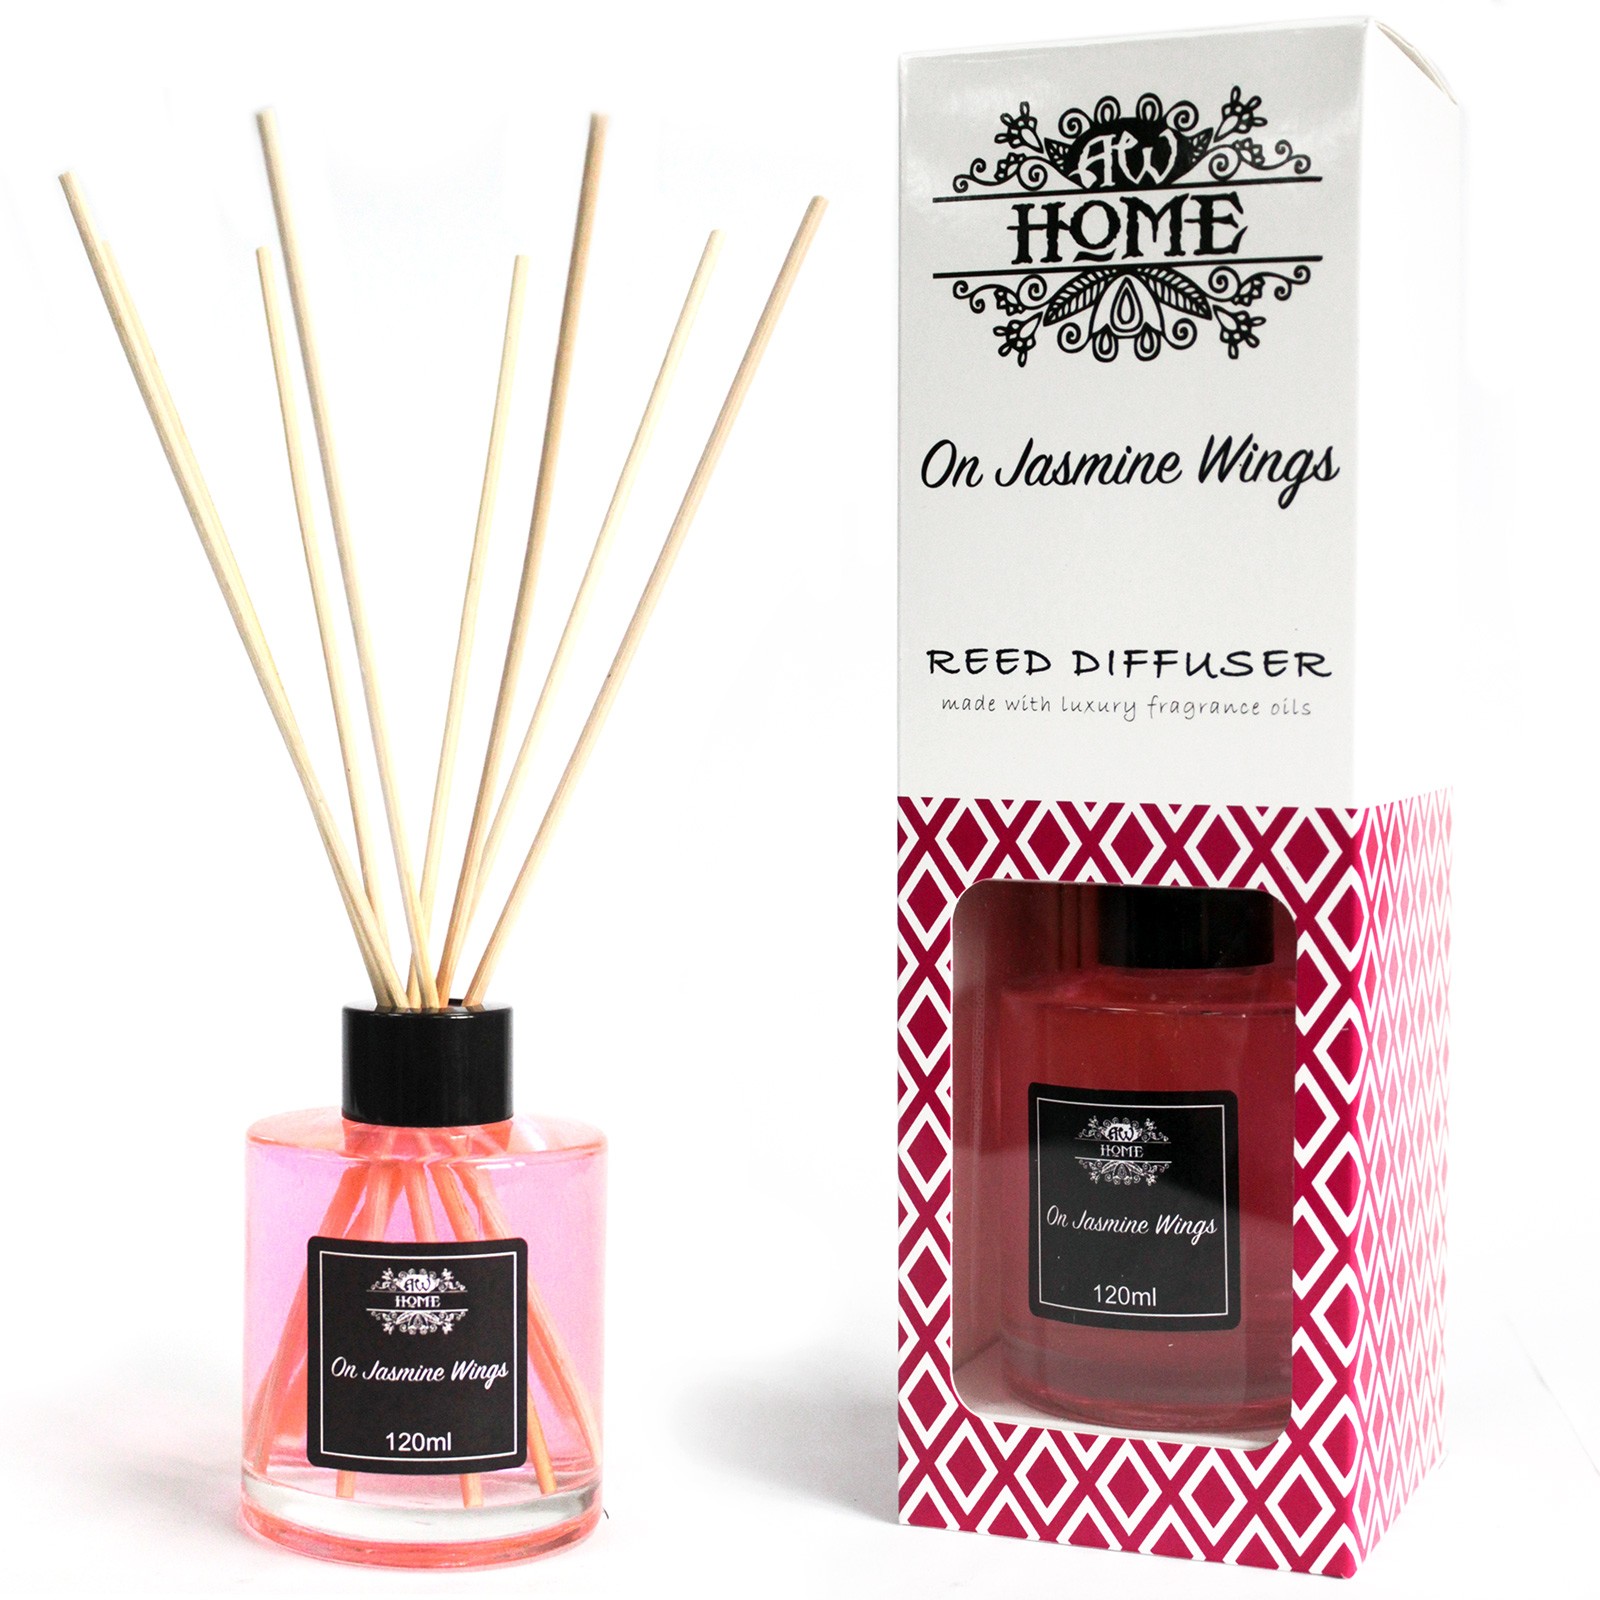 On Jasmine Wings - Home Fragrance Reed Diffuser - 120ml With Reeds